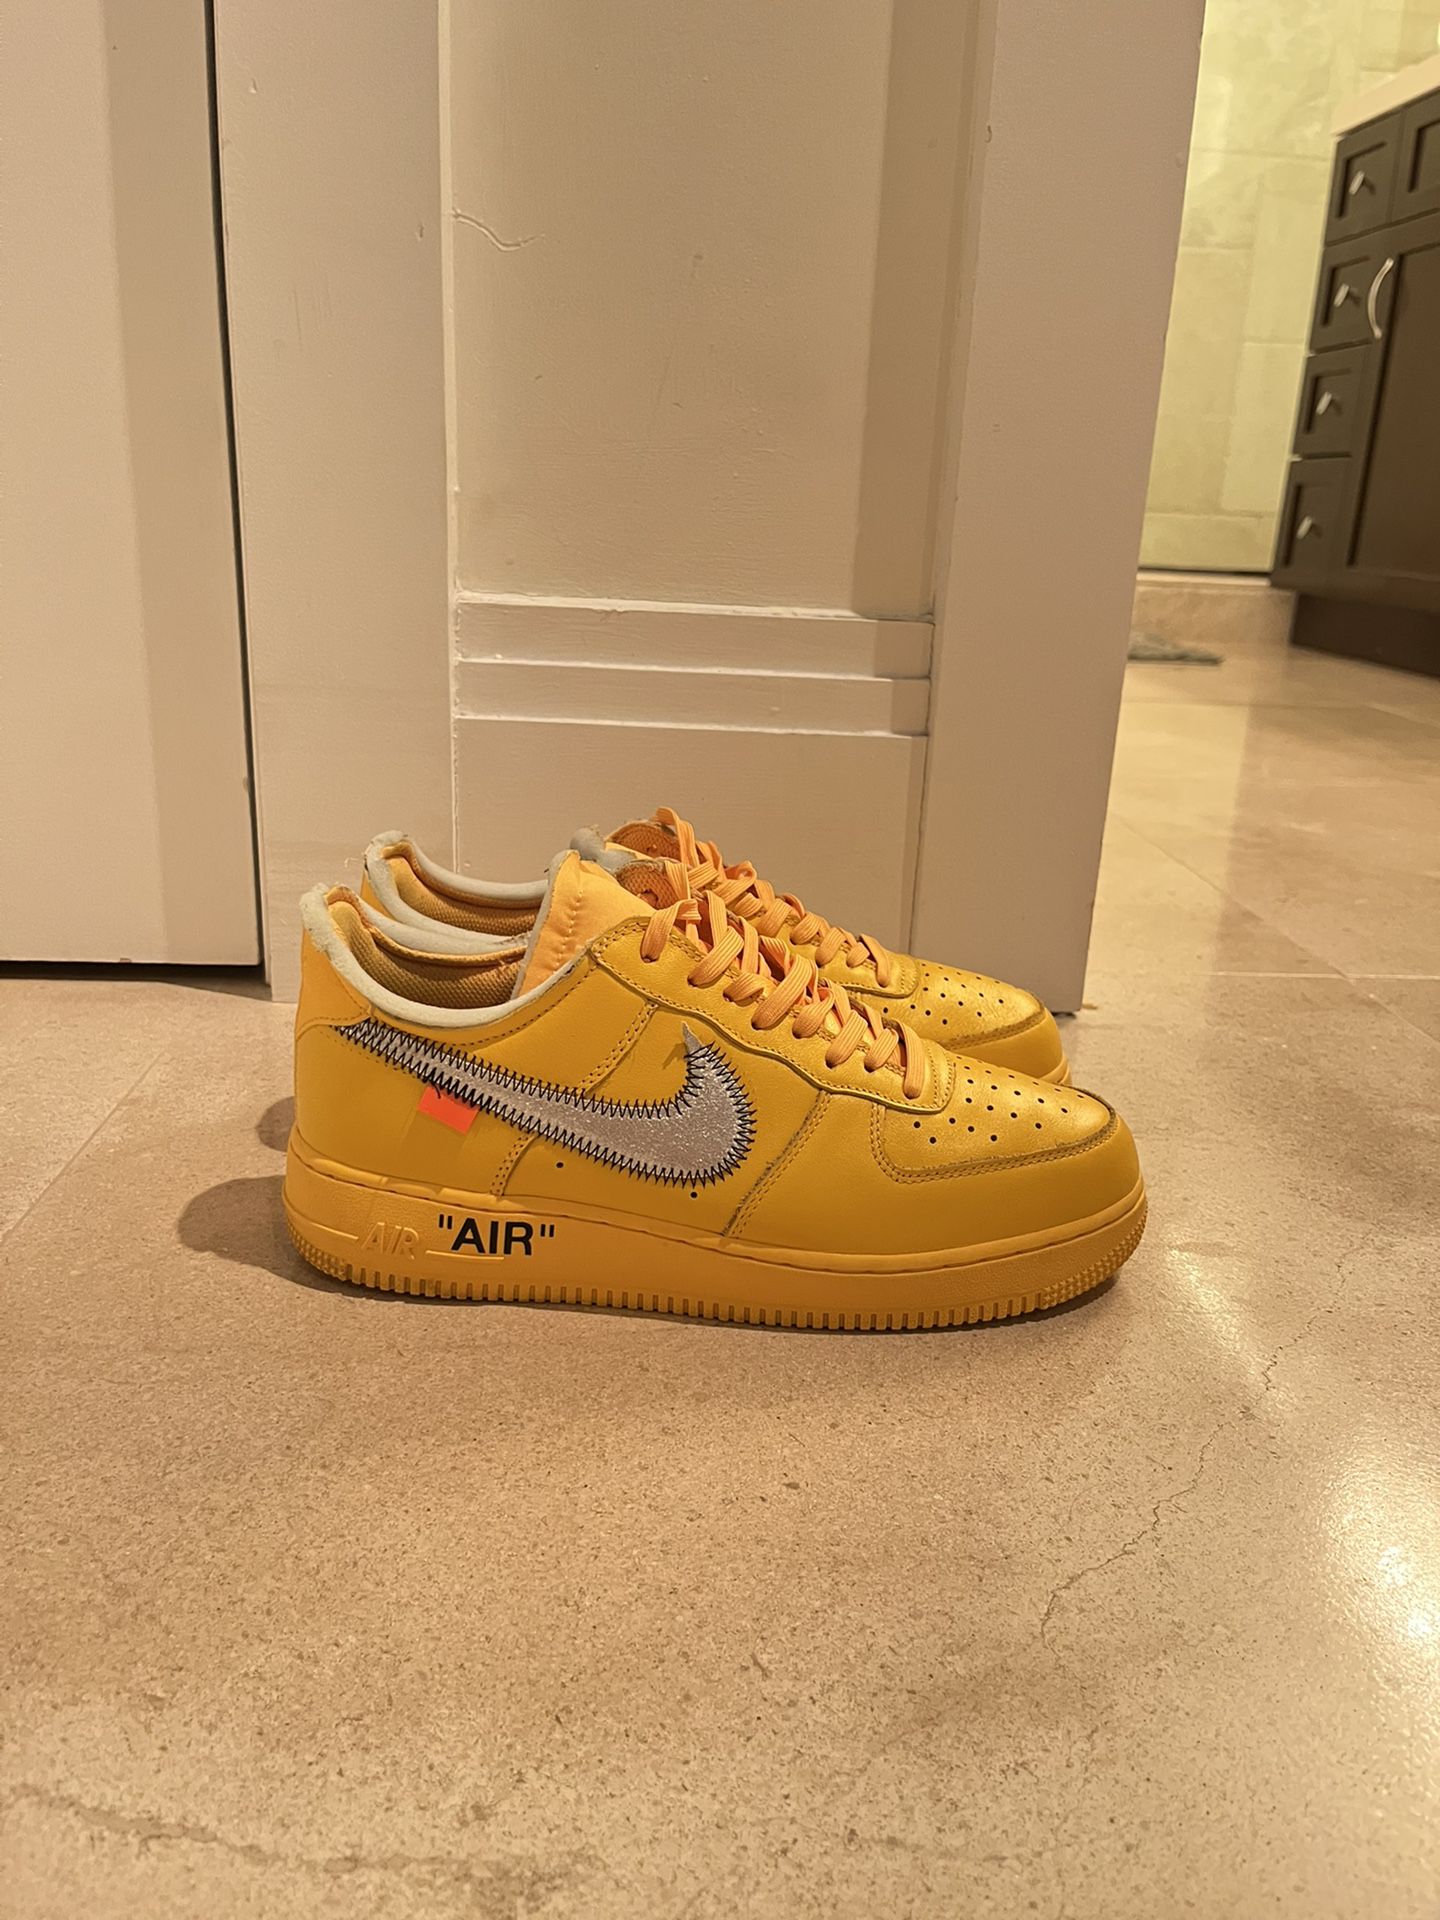 Nike Air Force 1 x Off-White “Brooklyn” Size 9 for Sale in Miami, FL -  OfferUp